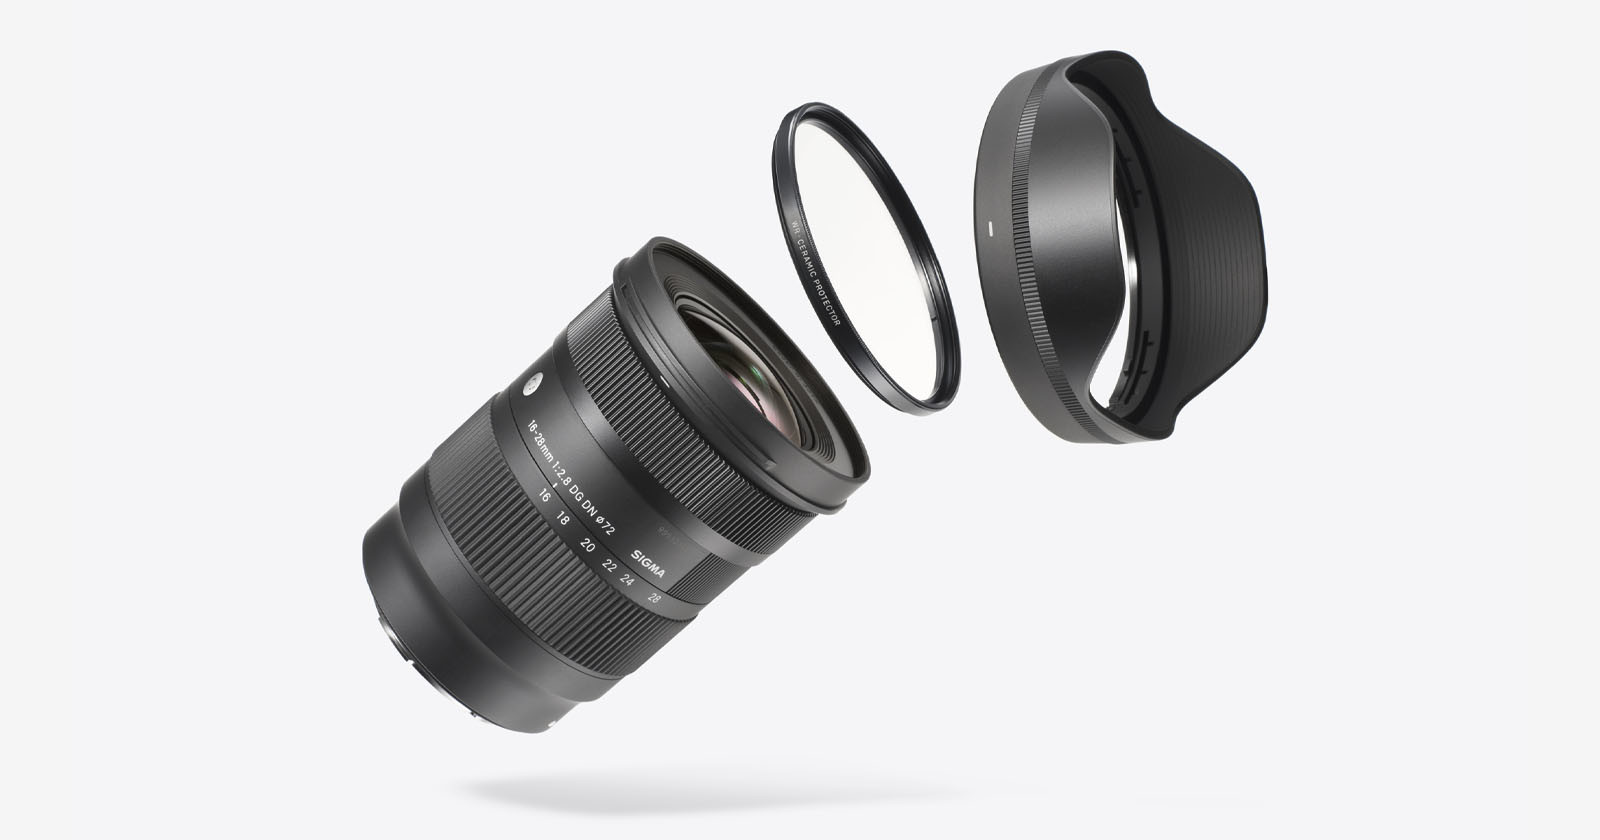  sigma launches 16-28mm lens sony 